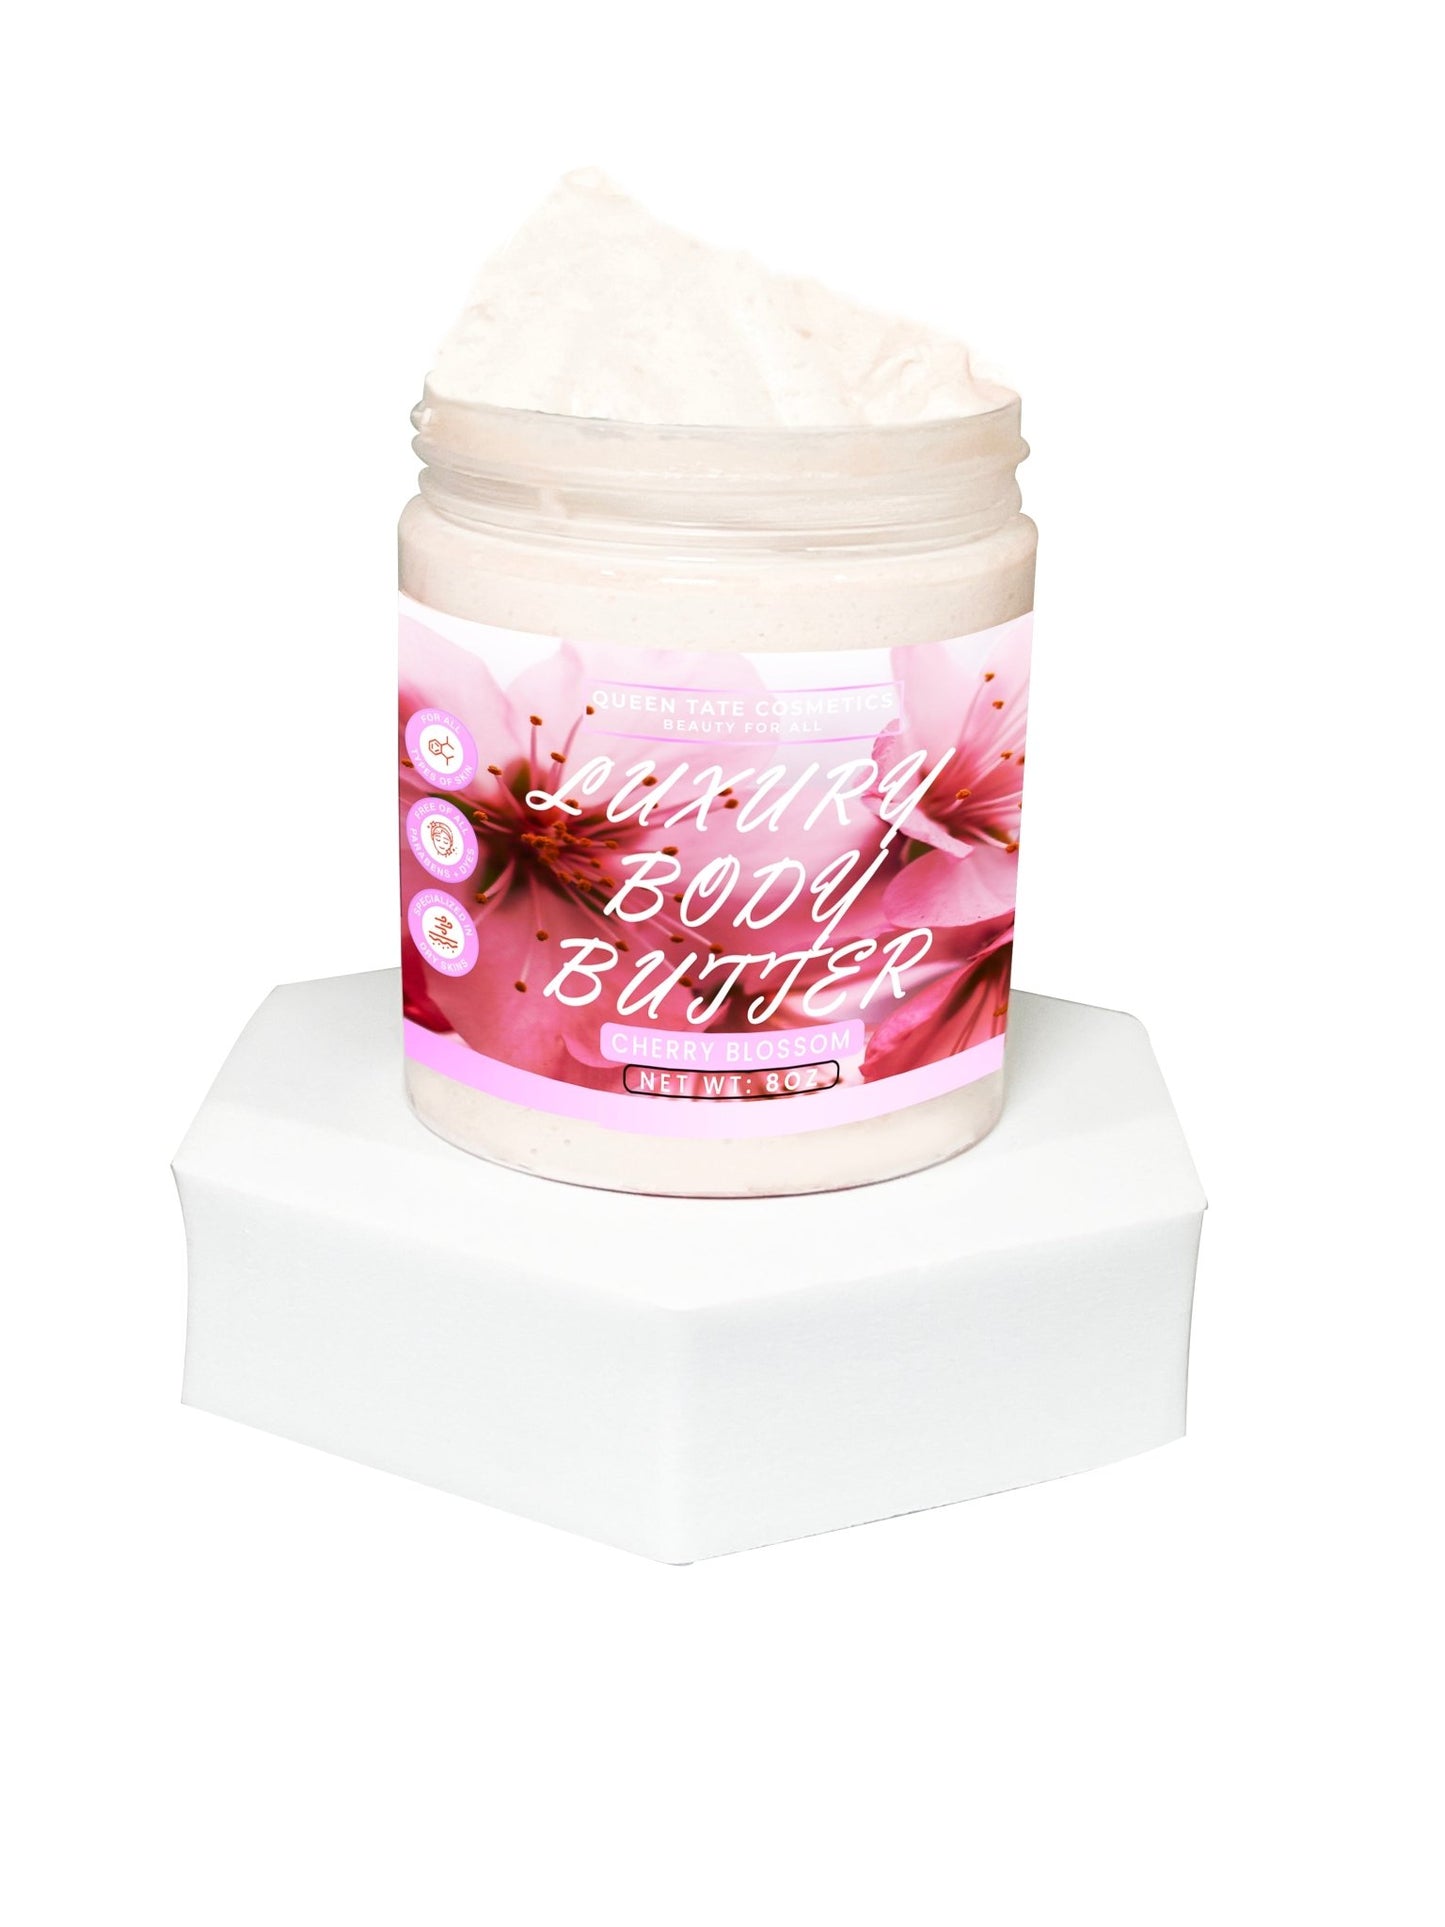 Cherry Blossom-Handcrafted Body Butter - Queen Tate CosmeticsHandcrafted Luxury Body ButterCherry Blossom-Handcrafted Body ButterHandcrafted Luxury Body ButterQueen Tate Cosmetics 8 oz